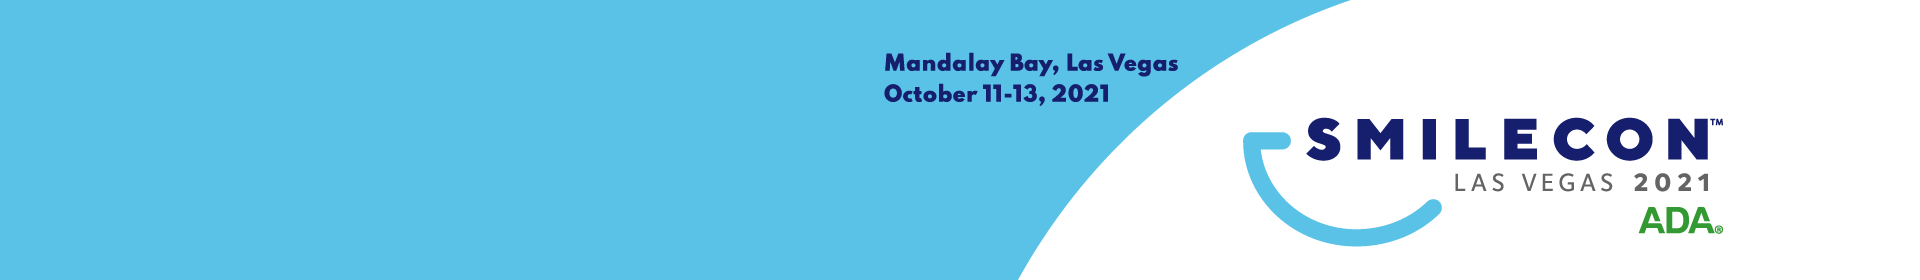 2021 ADA Annual Meeting General Call for Abstracts Event Banner